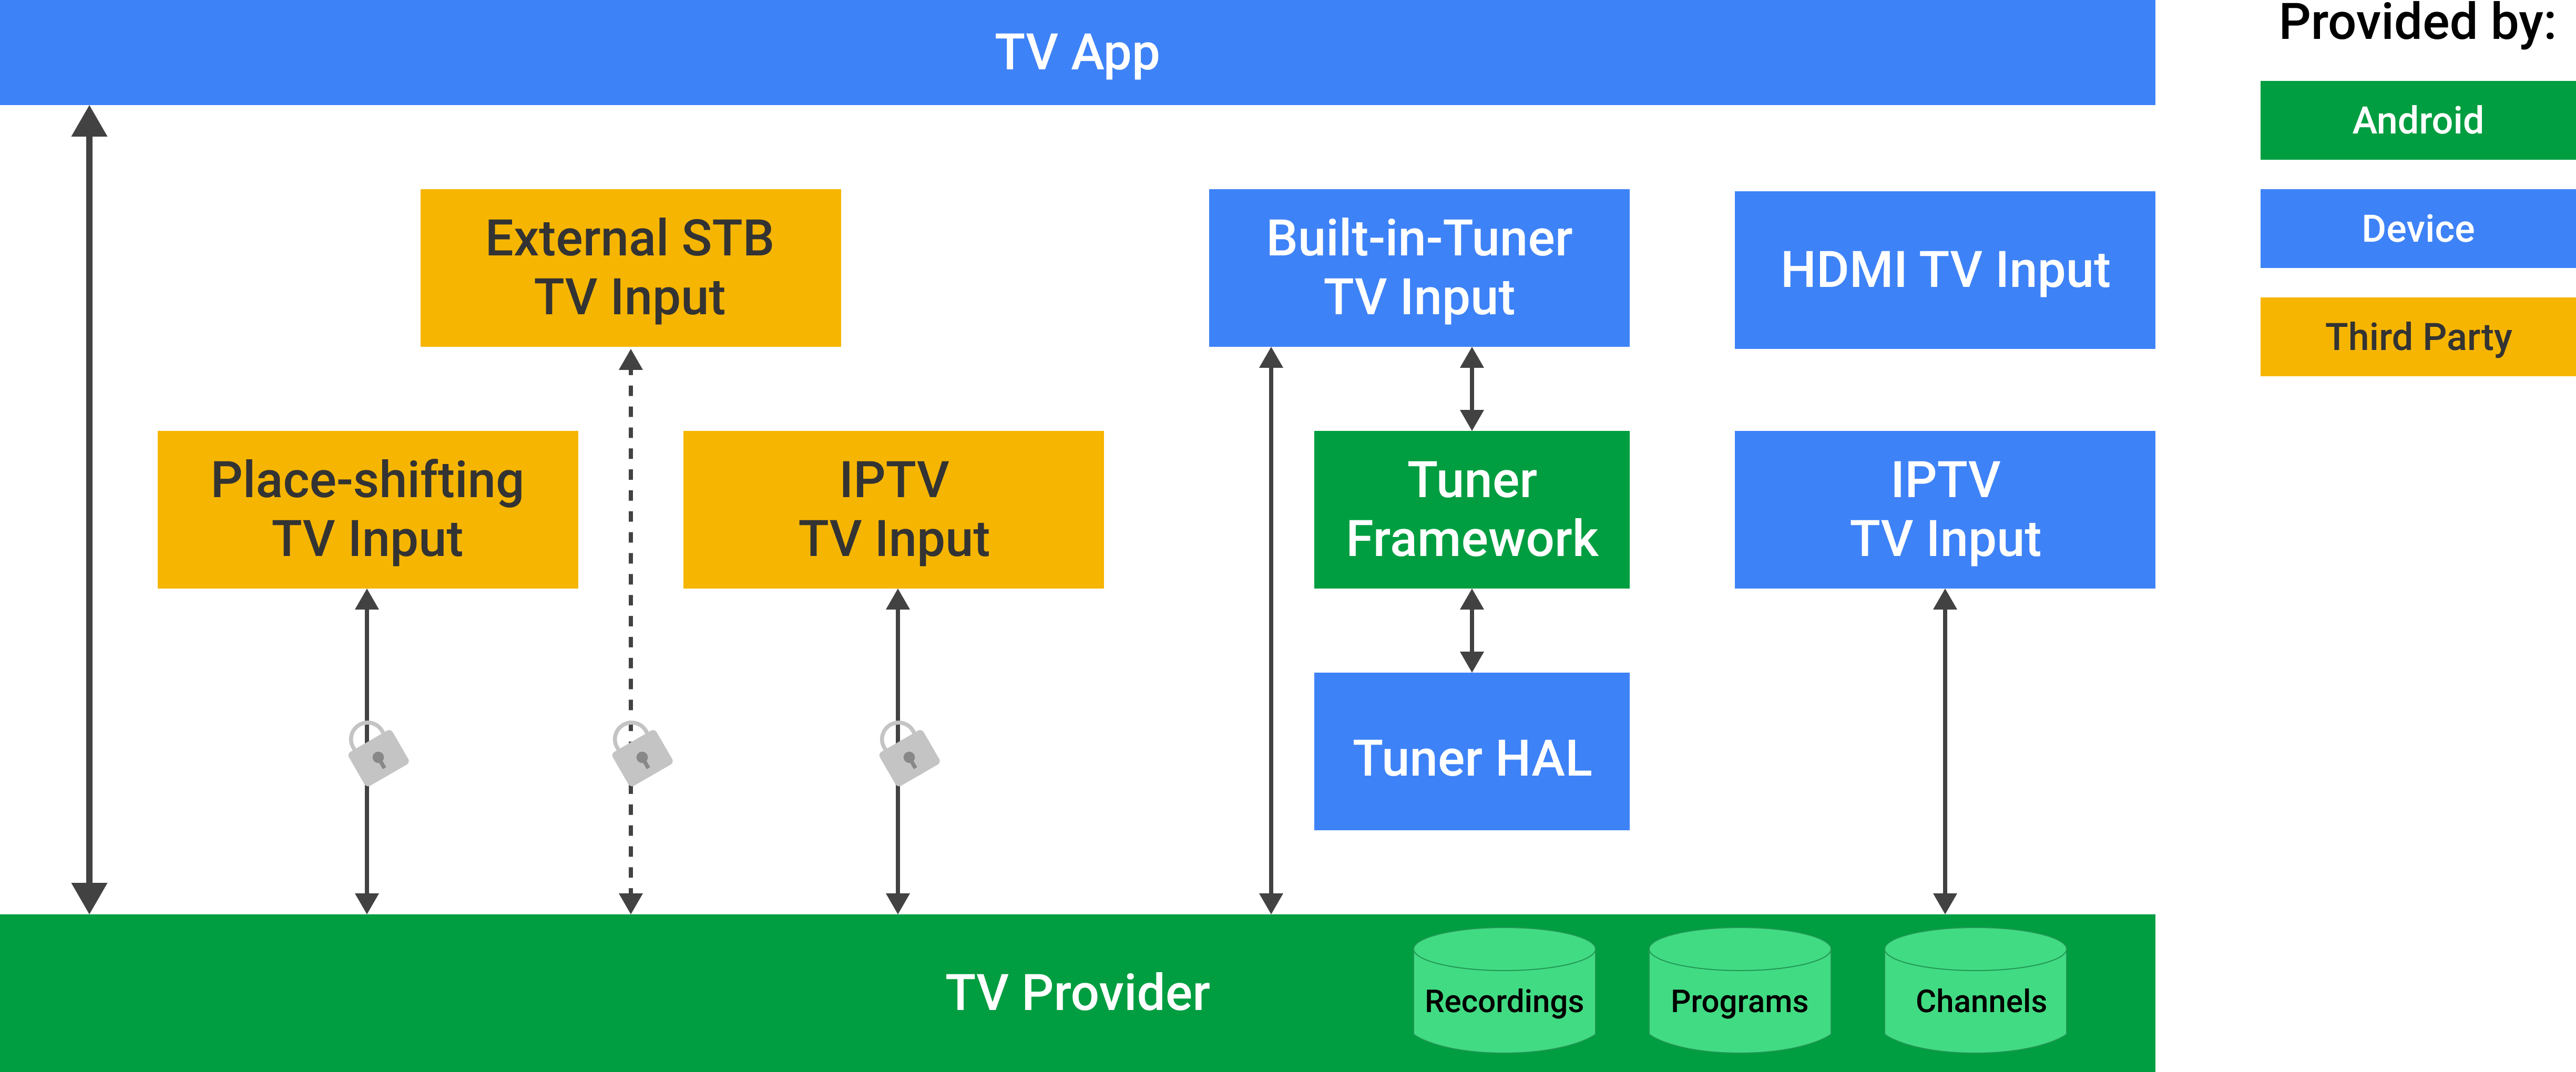 Android TV Provider